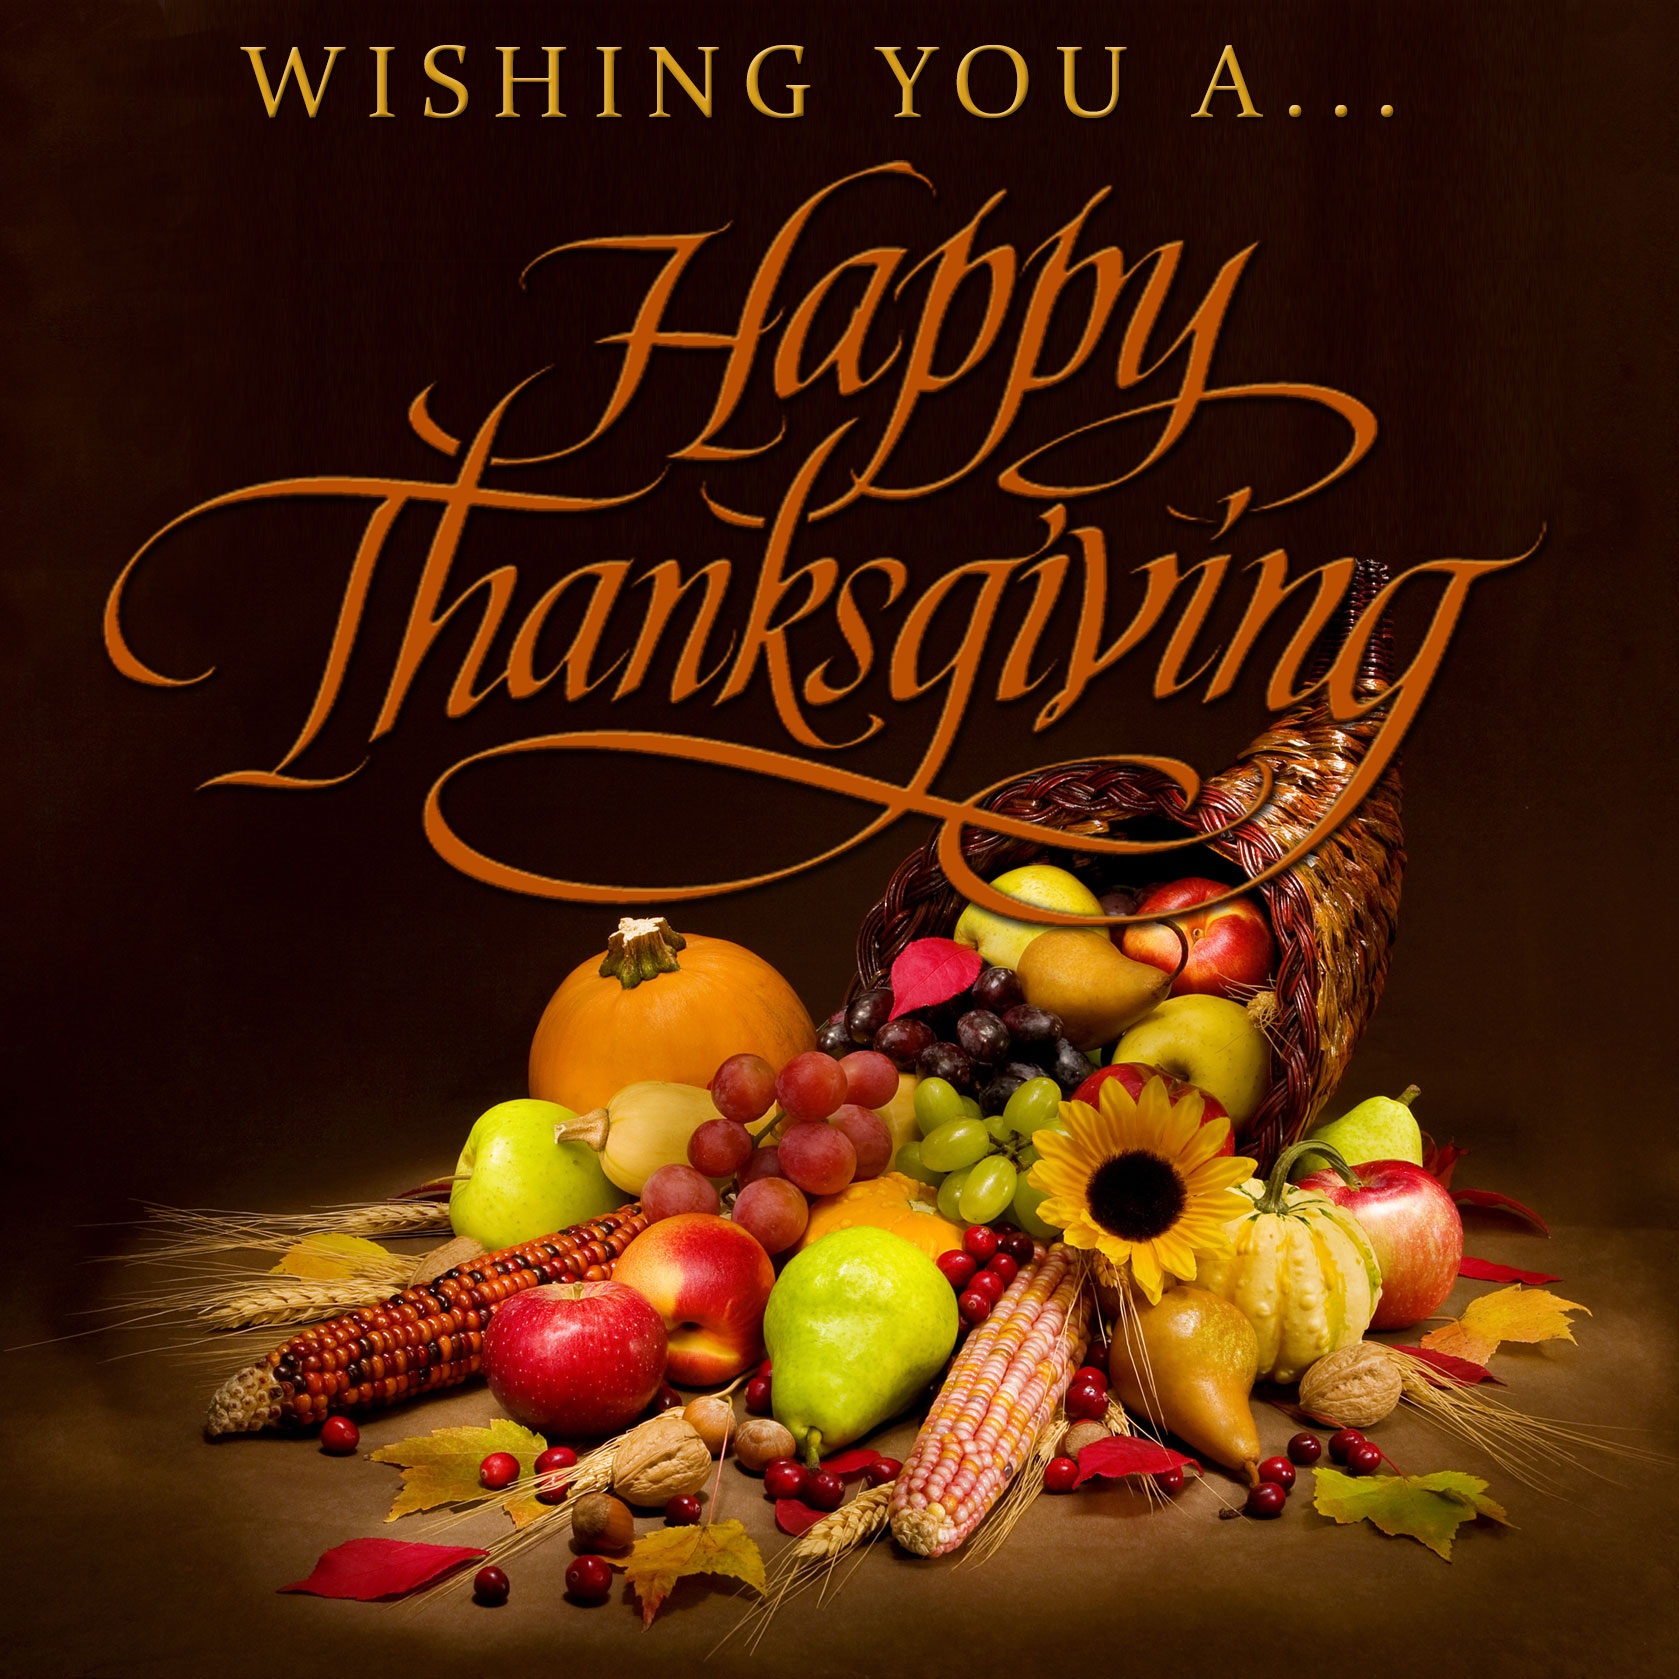 Happy Thanksgiving and remember to Shop Small this holiday season! - Amy  Grant